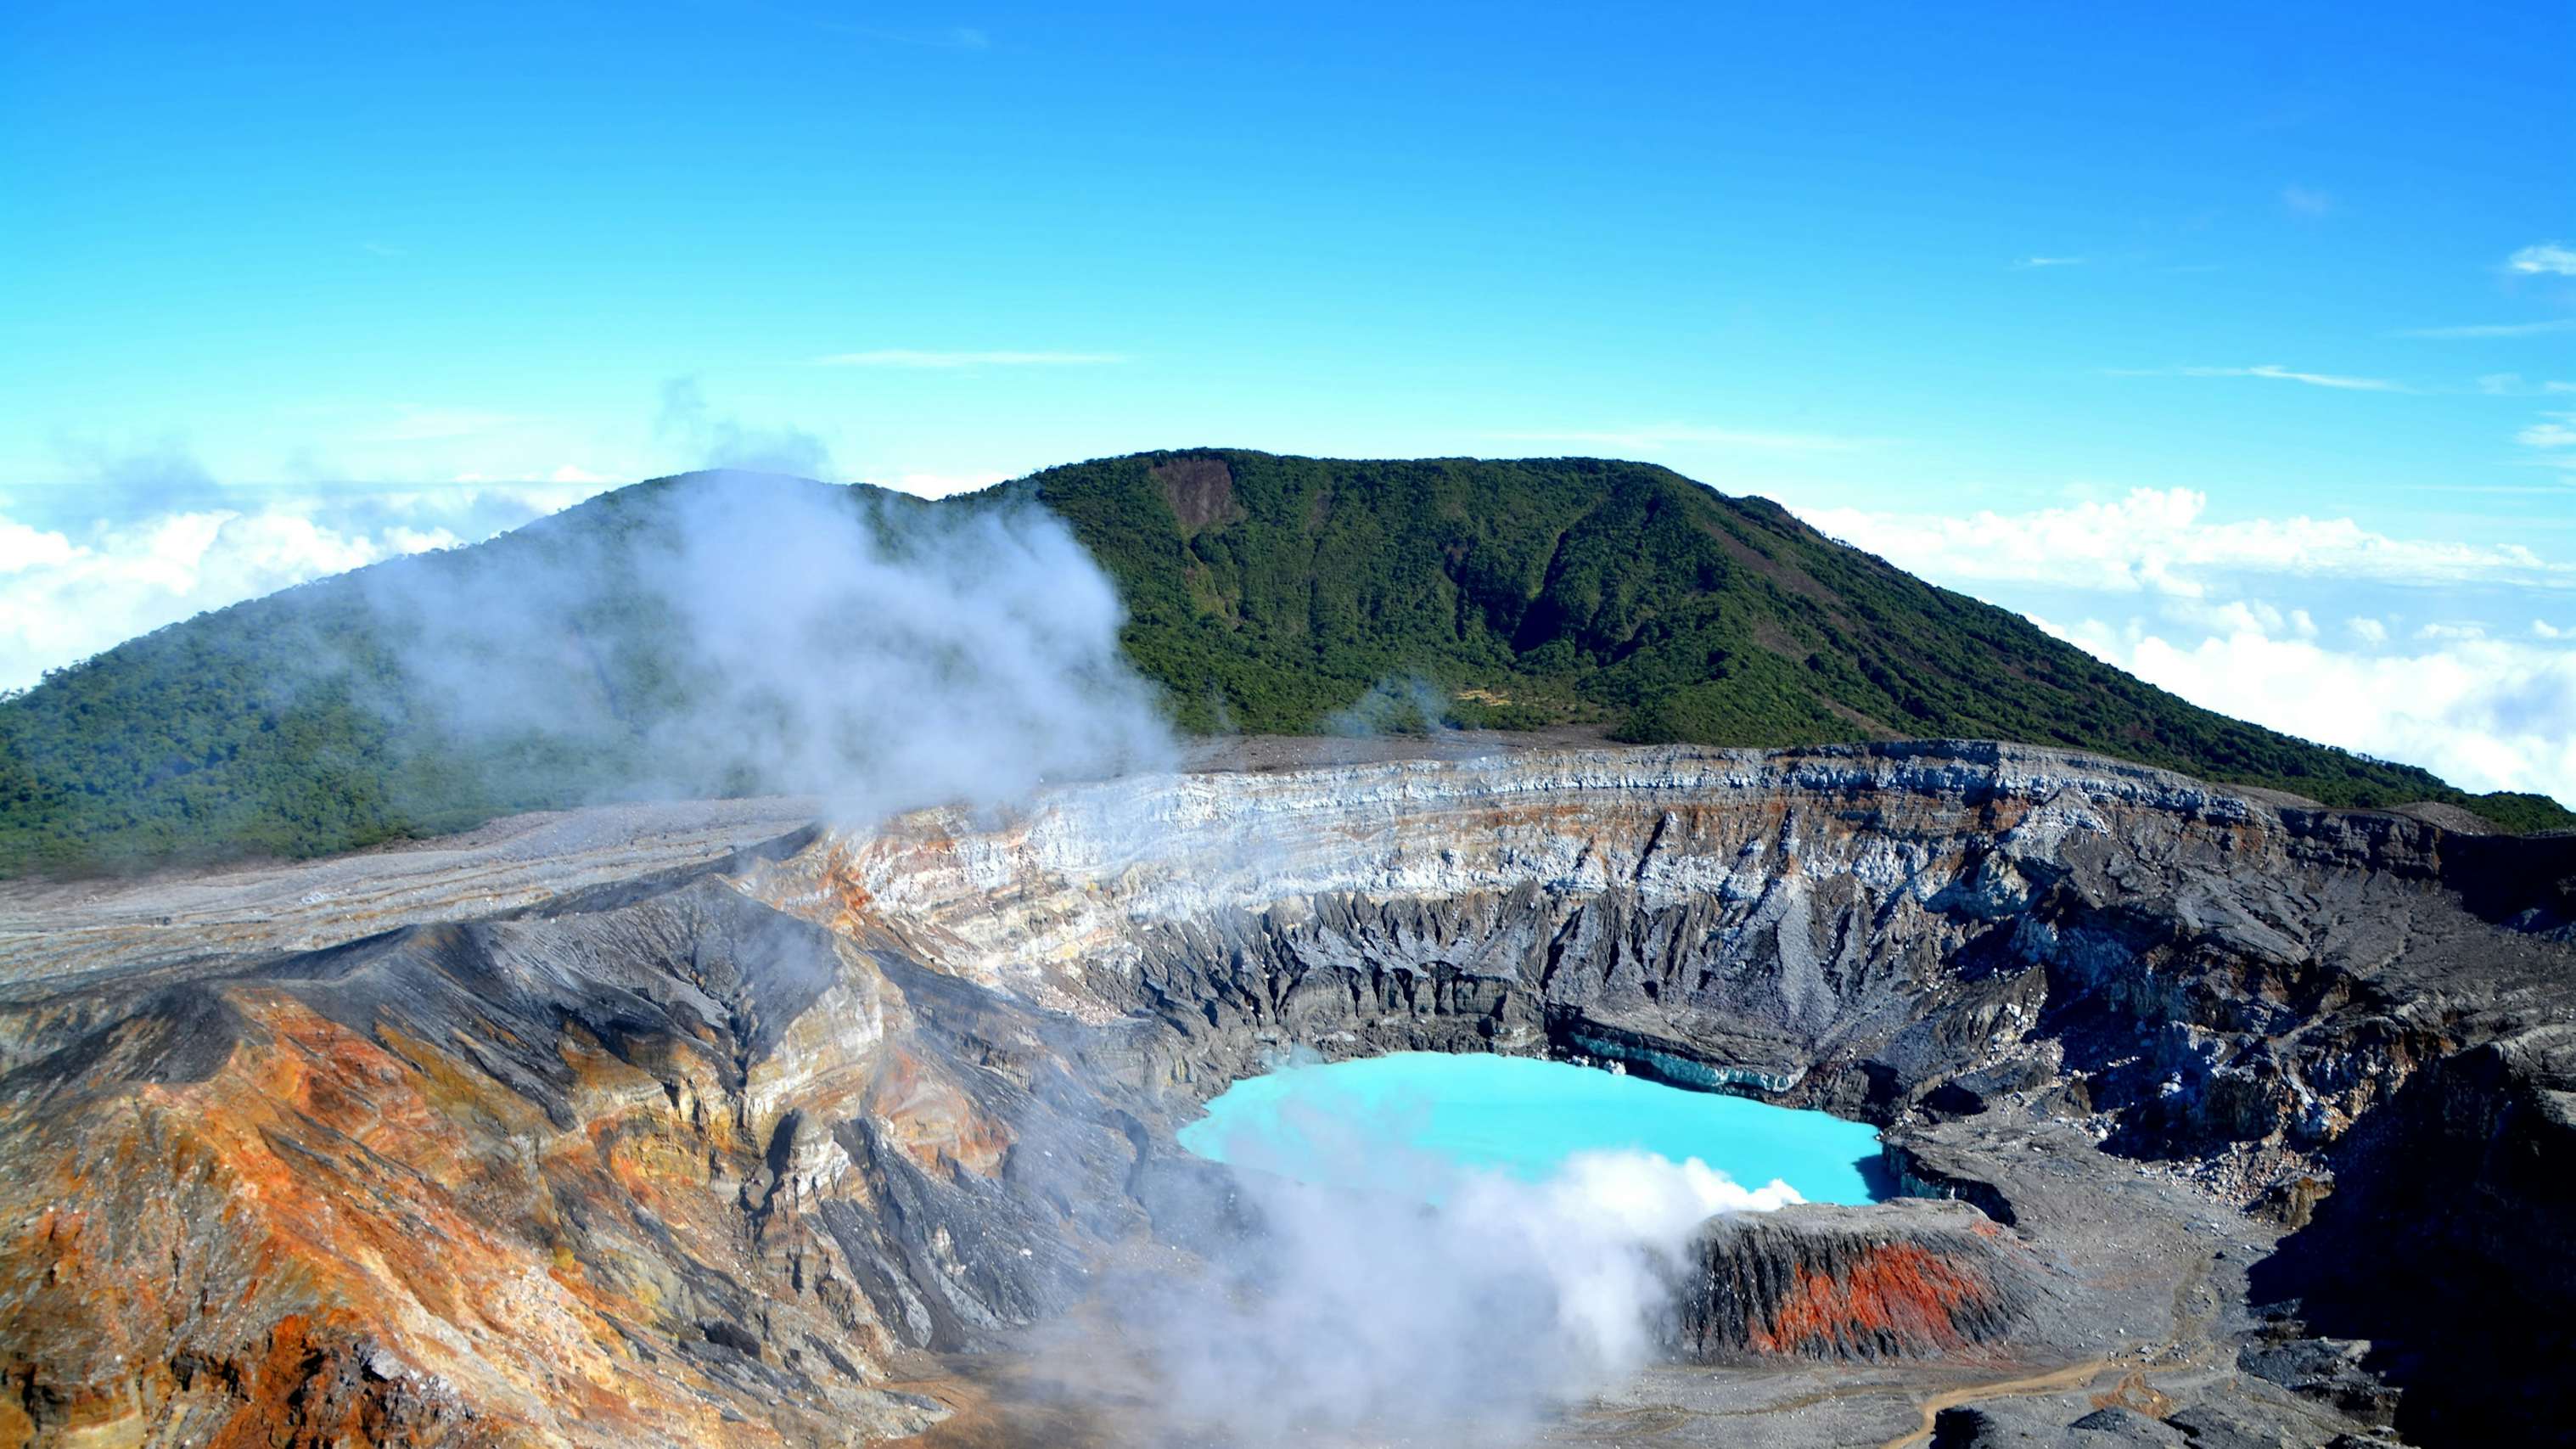 Costa Rica Yacht Charter - Poas Volcano, Costa Rica, cetral america with hot spring and steam bright blue sky